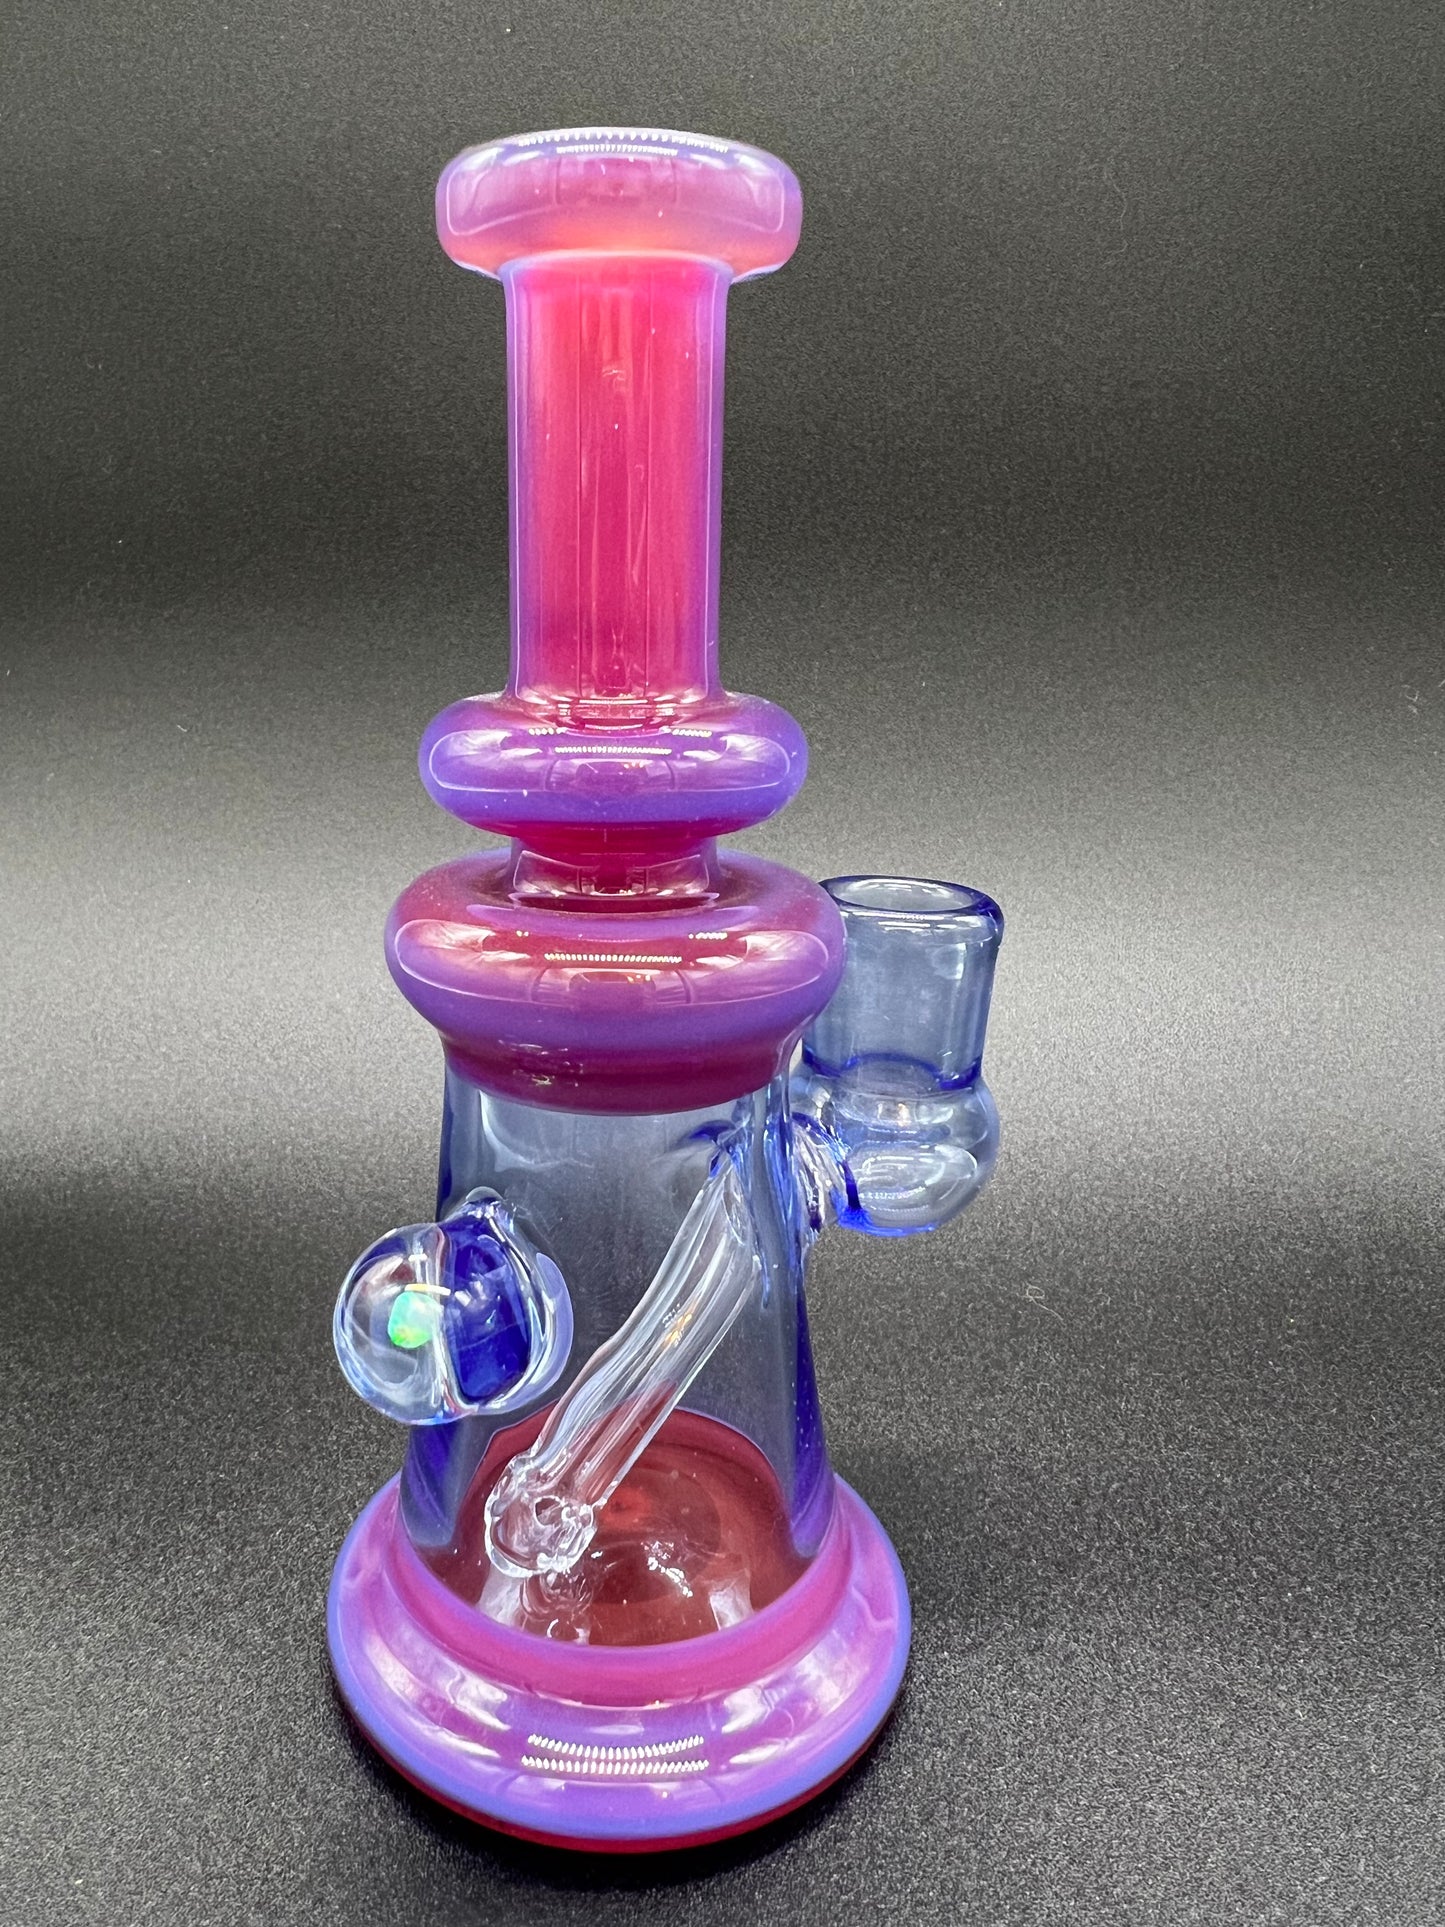 Scully glass rig